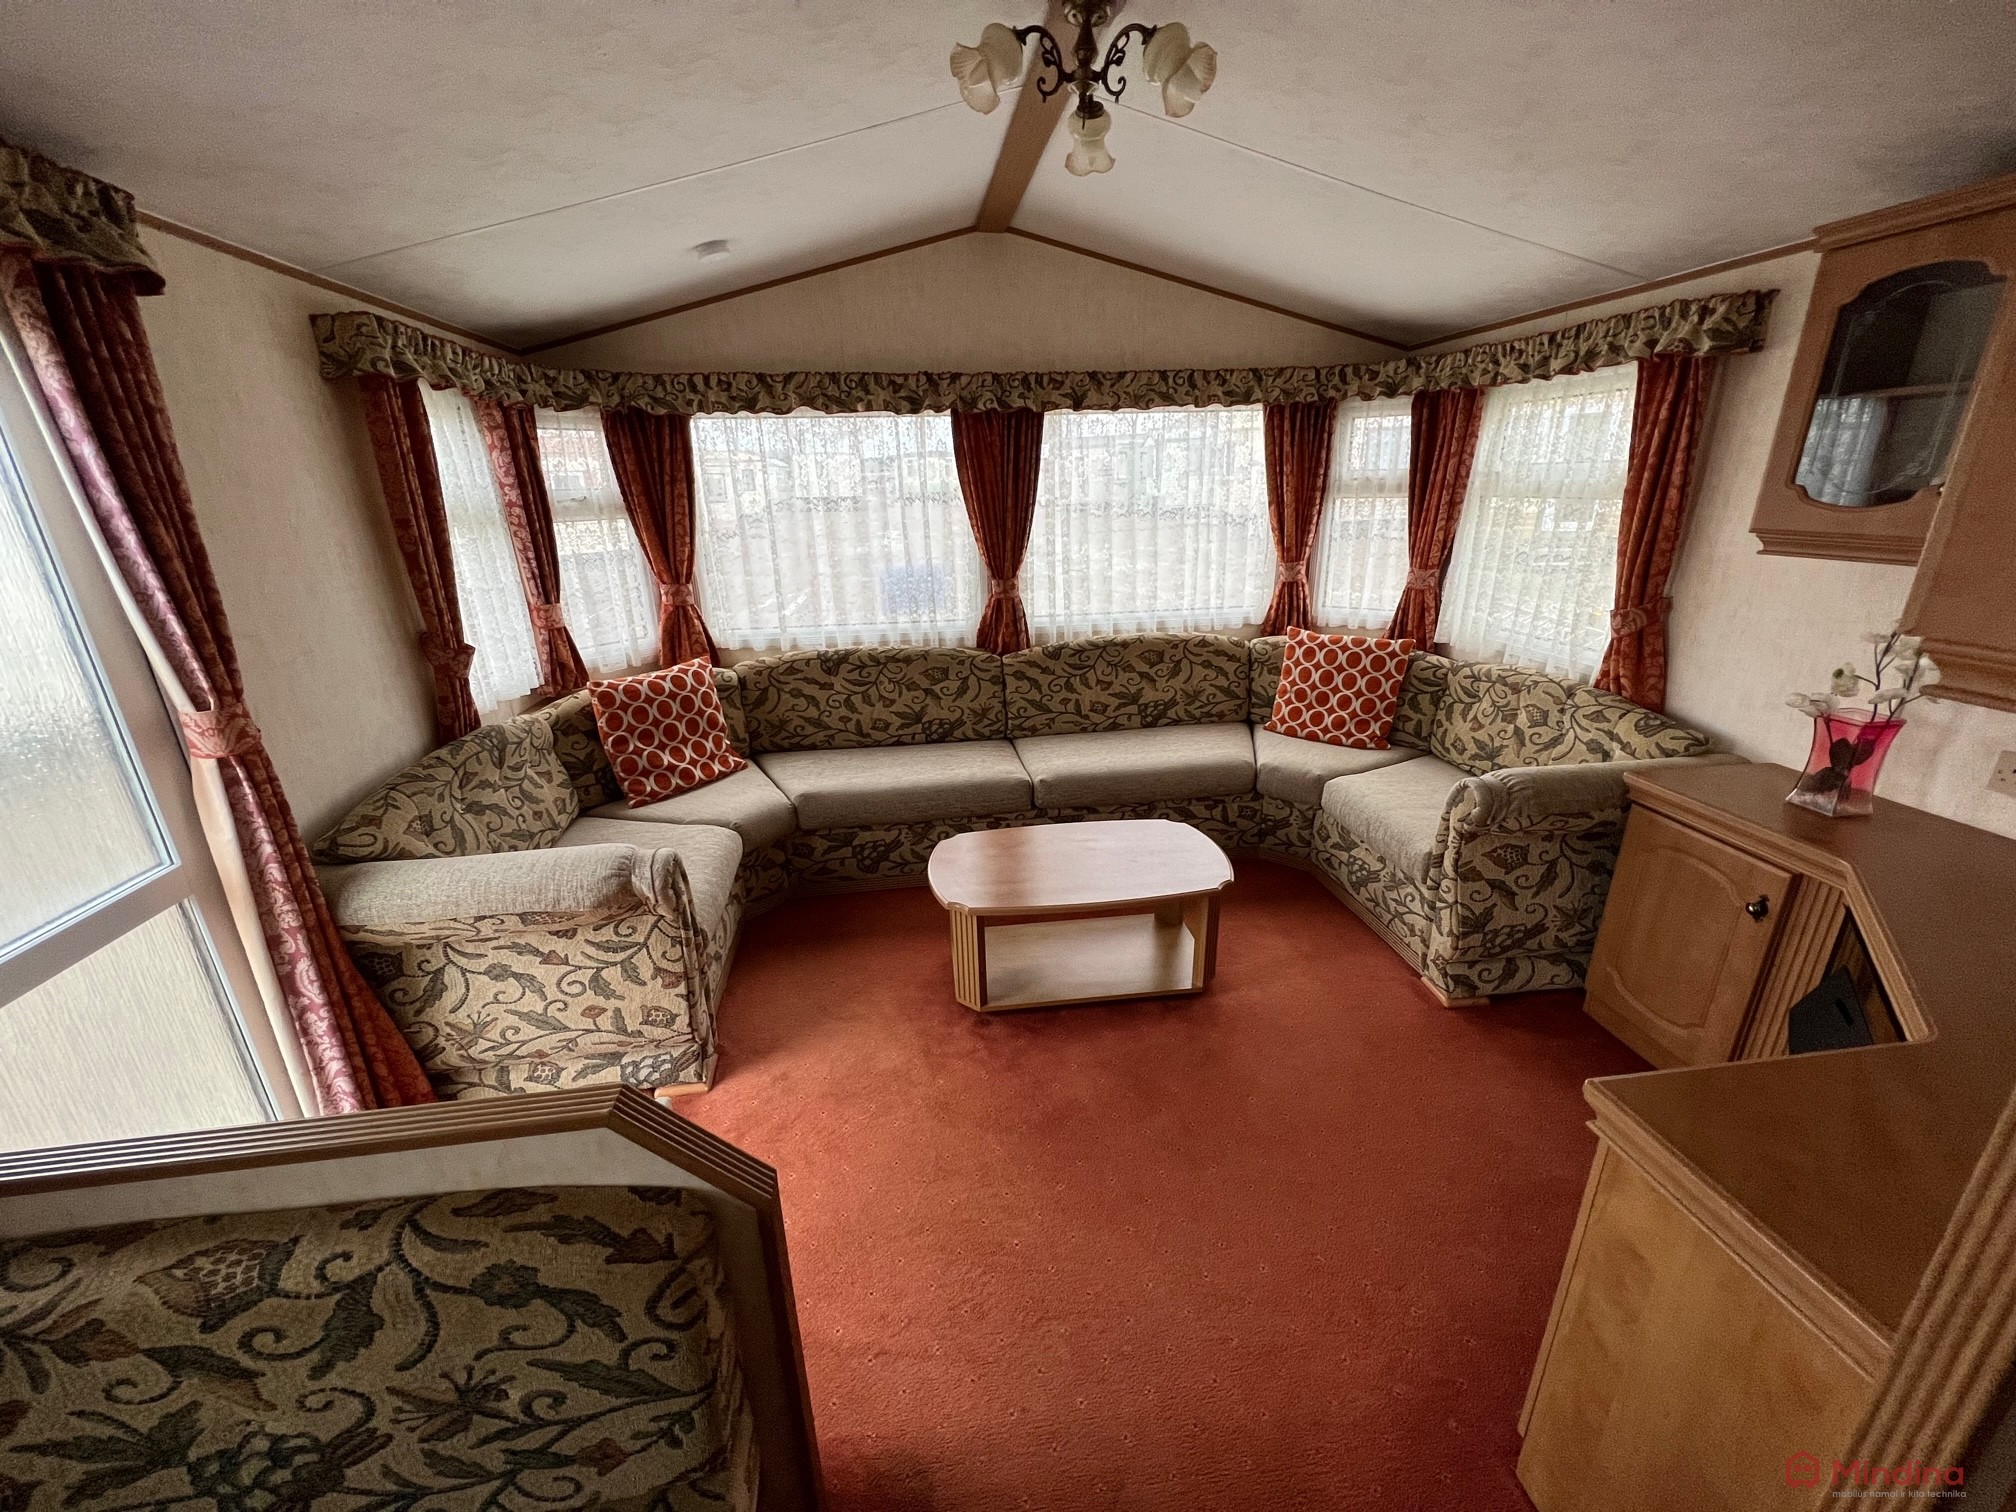 Willerby Countrystyle 3,7×11